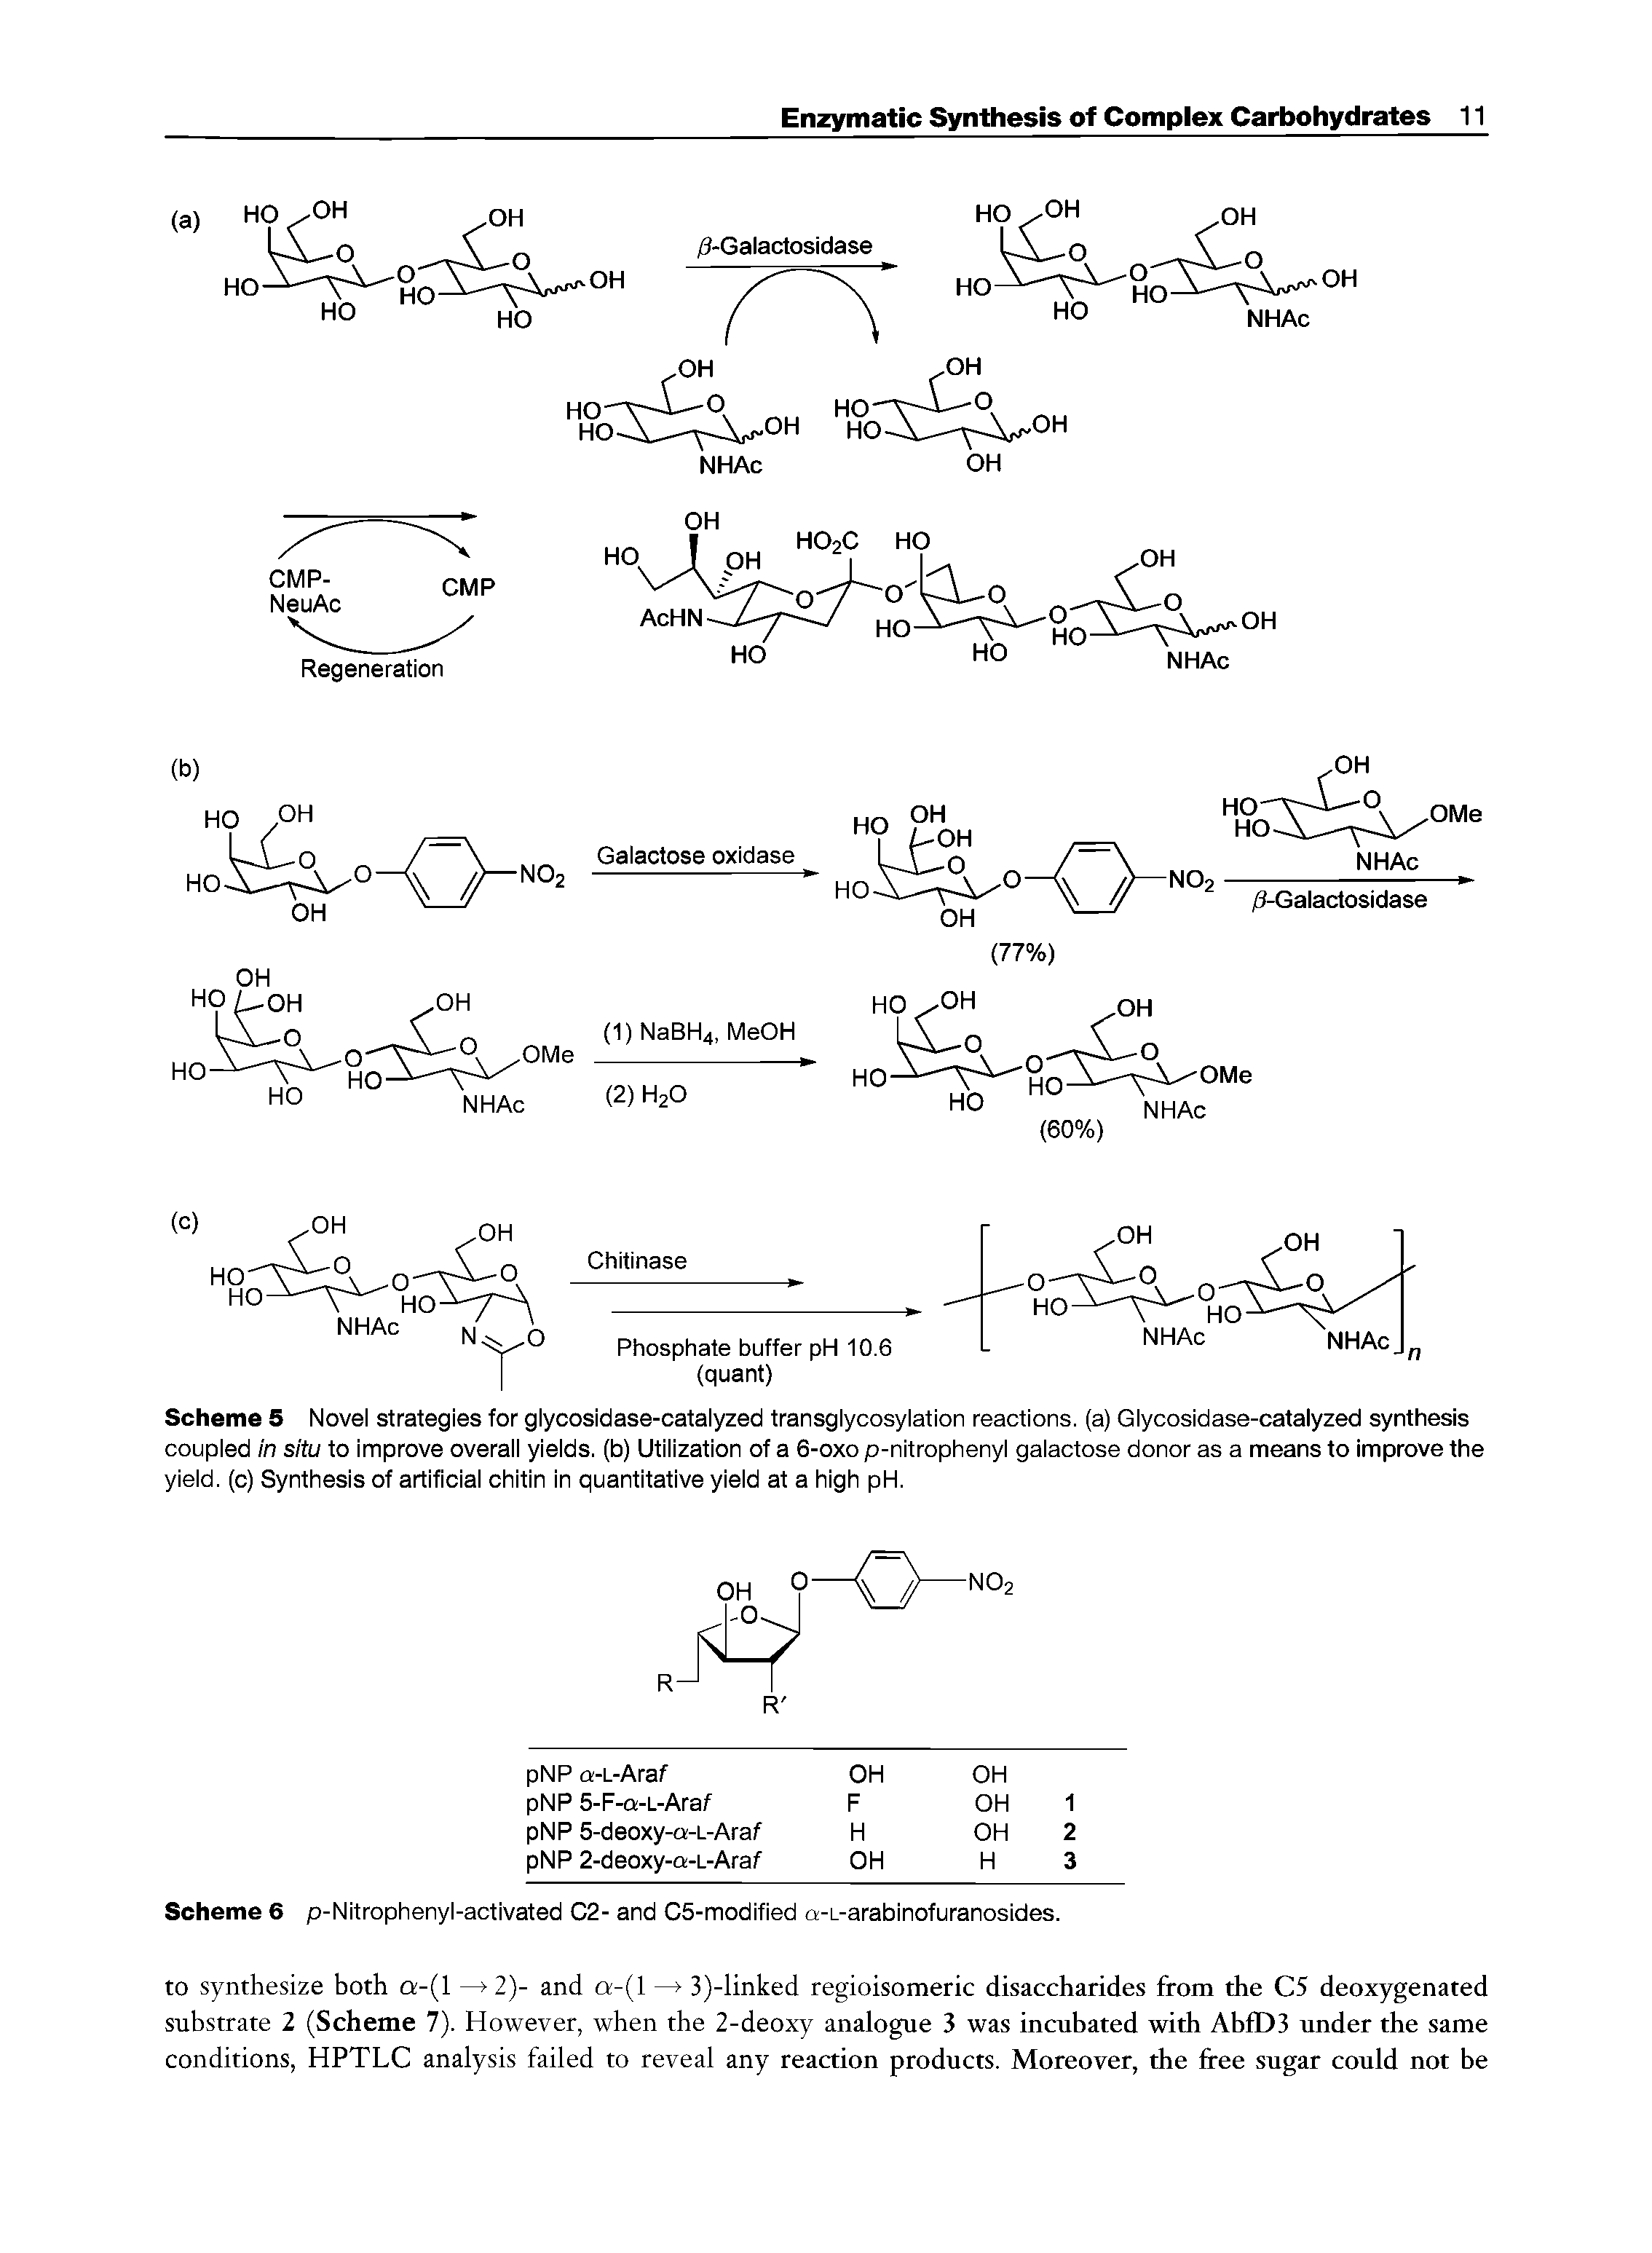 Scheme 5 Novel strategies for glycosidase-catalyzed transglycosylation reactions, (a) Glycosidase-catalyzed synthesis coupled in situ to improve overall yields, (b) Utilization of a 6-0x0 p-nitrophenyl galactose donor as a means to improve the yield, (c) Synthesis of artificial chitin in quantitative yield at a high pH.